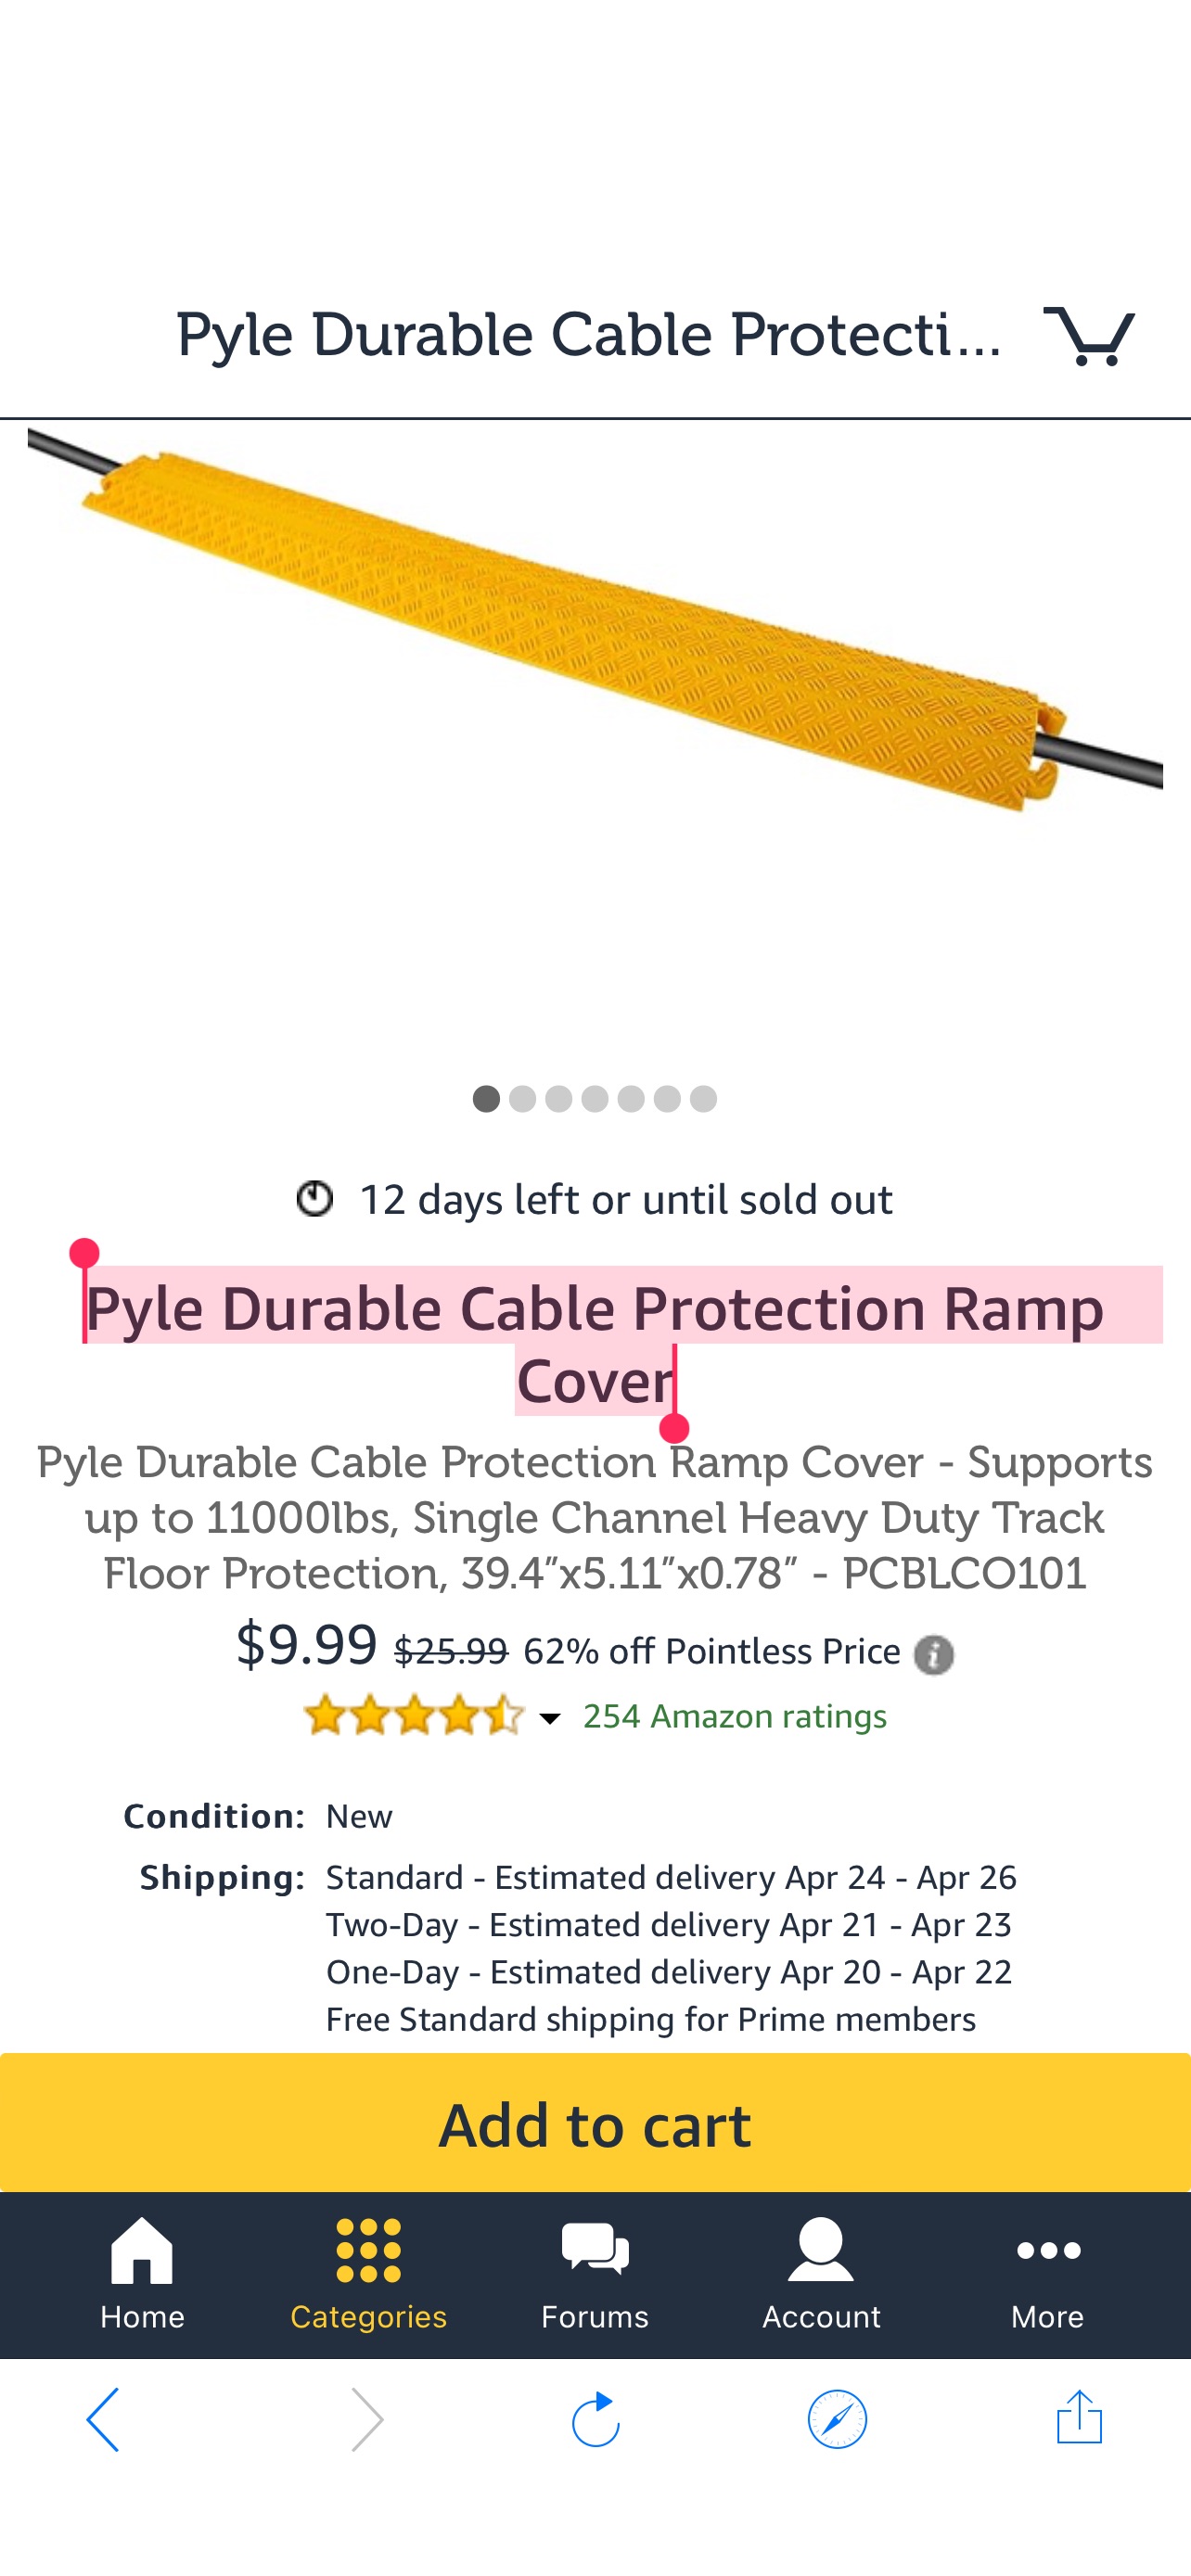 Pyle Durable Cable Protection Ramp Cover 耐用电缆保护盖